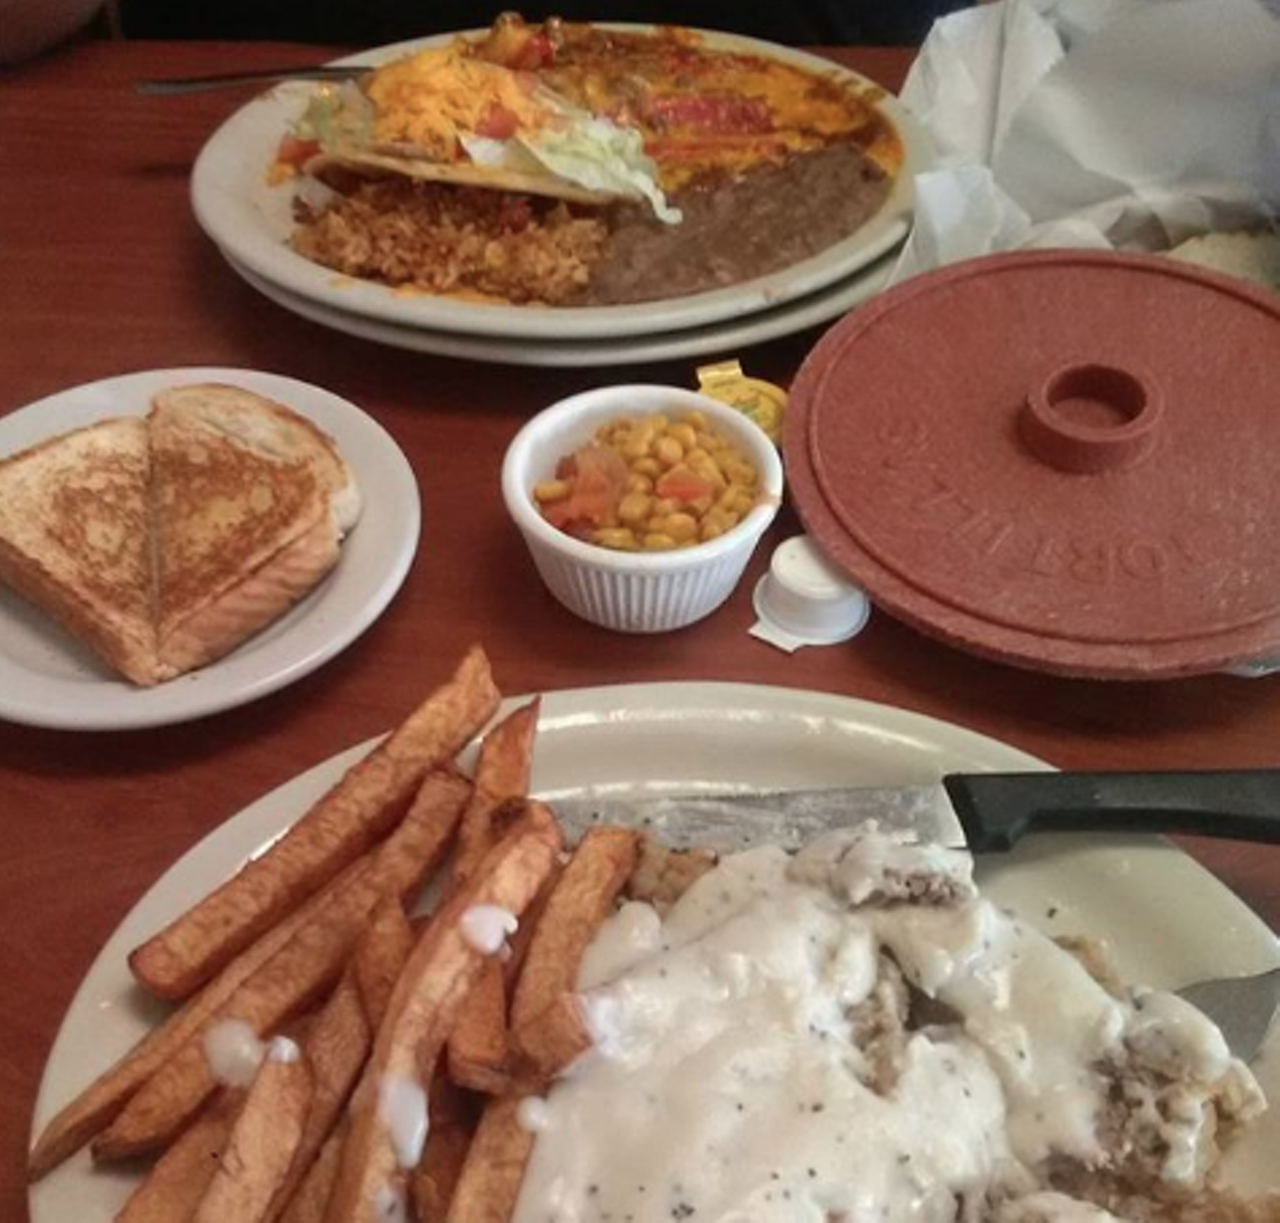 Bobbie’s Cafe
6728 S Flores St, (210) 923-1158
Mosey on down to the Southside for some crazy good eats. You’ll find your typical Mexican dishes, as well as liver & onions, pork chops, and freshly-made fried chicken.
Photo via Instagram / loveroseskul